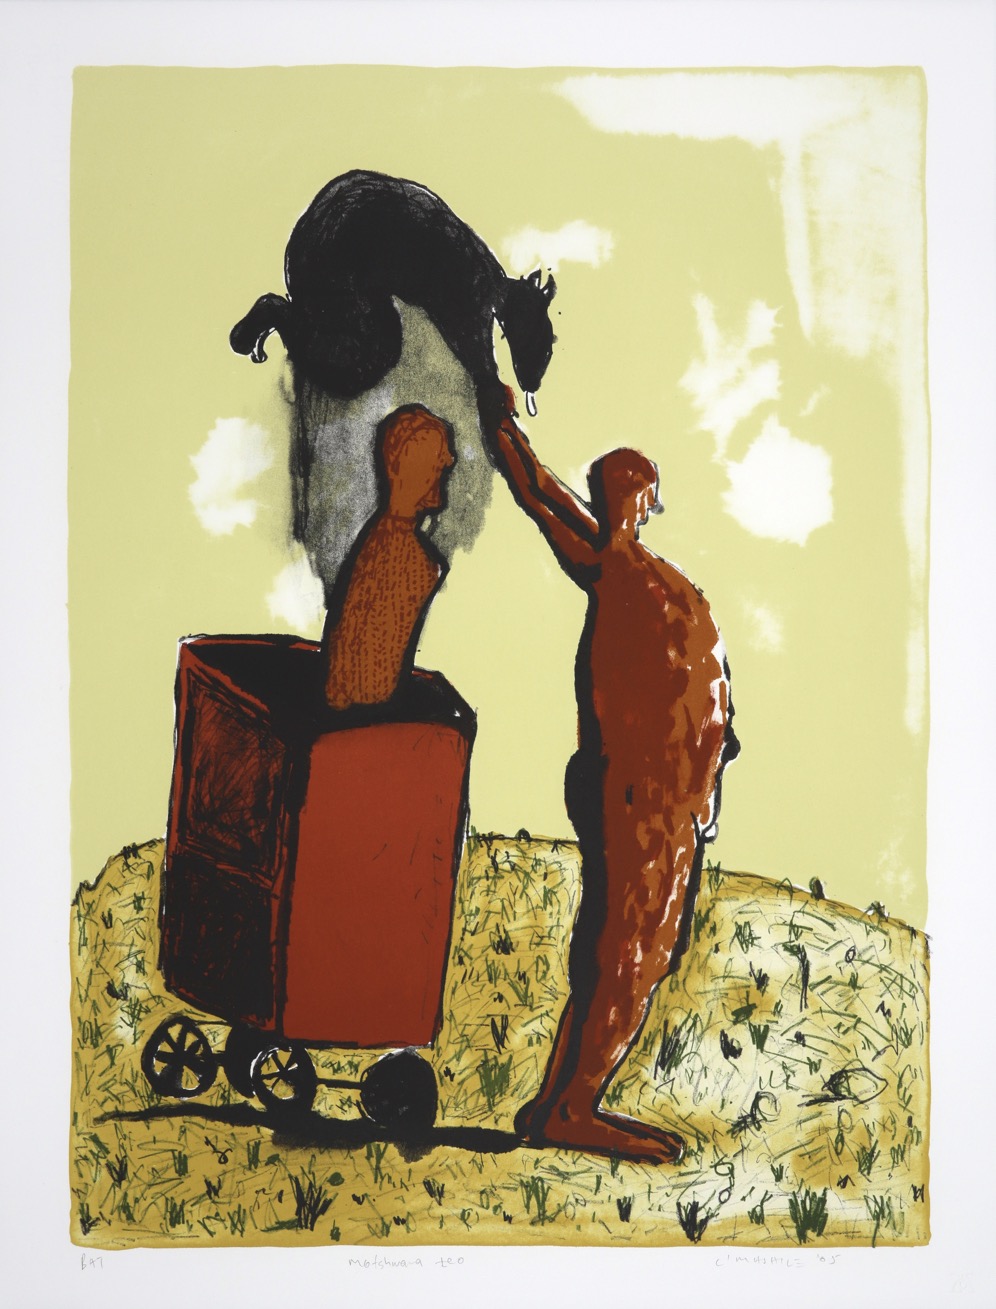 Figure in trolley behind a man with hands outstretched reaching towards mythical figure above them.